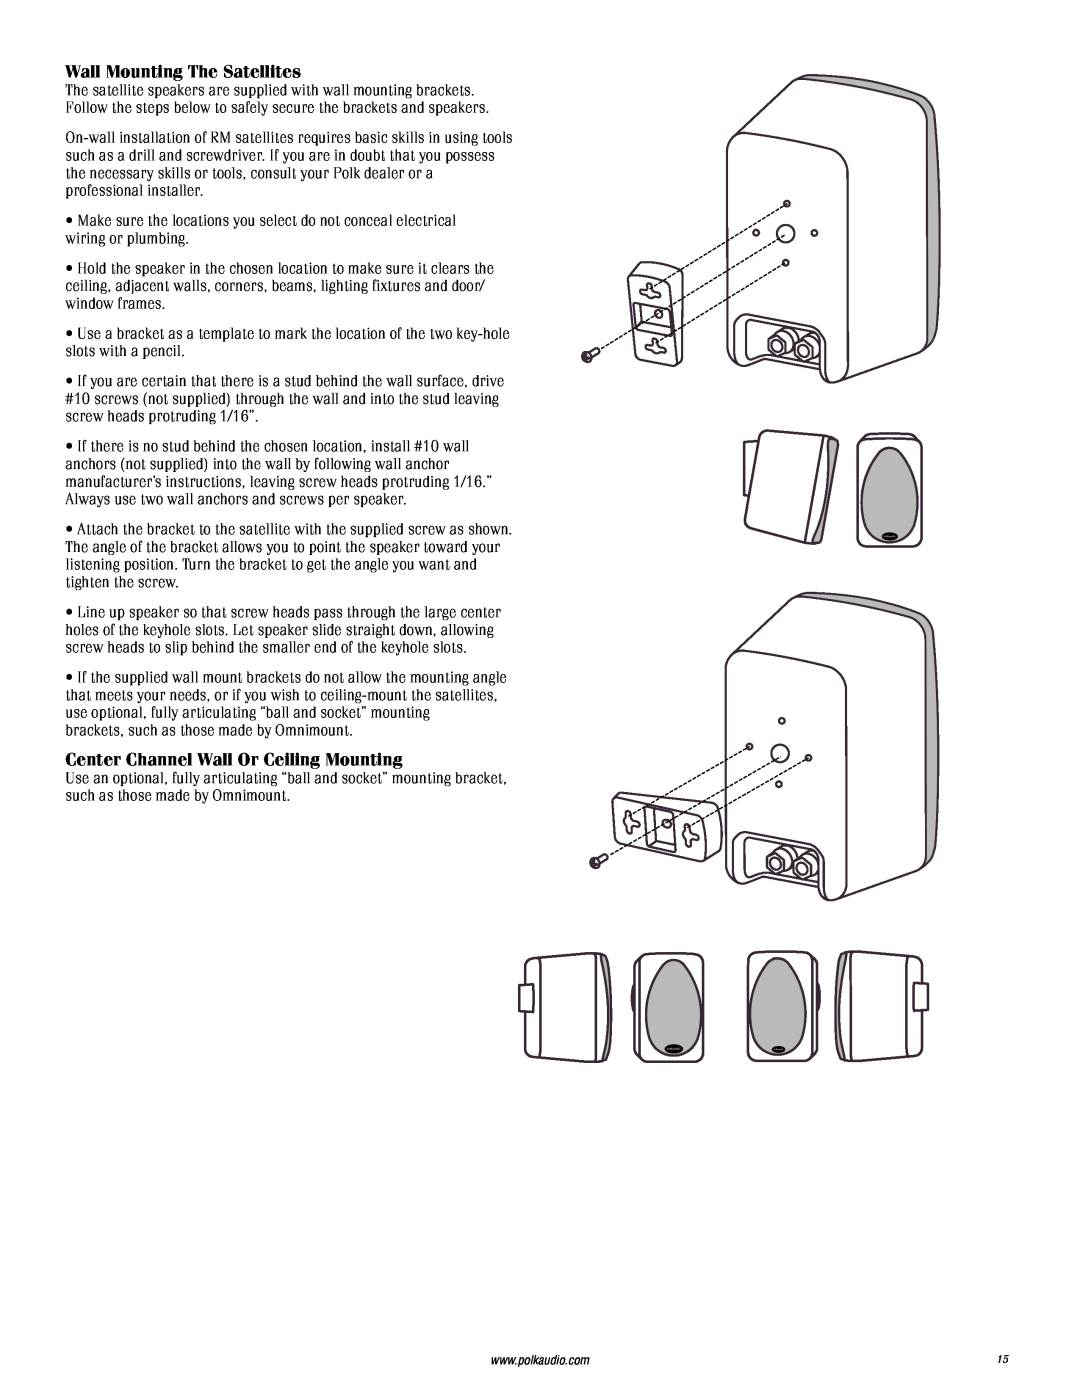 Polk Audio RMDS-1 instruction manual Wall Mounting The Satellites, Center Channel Wall Or Ceiling Mounting 